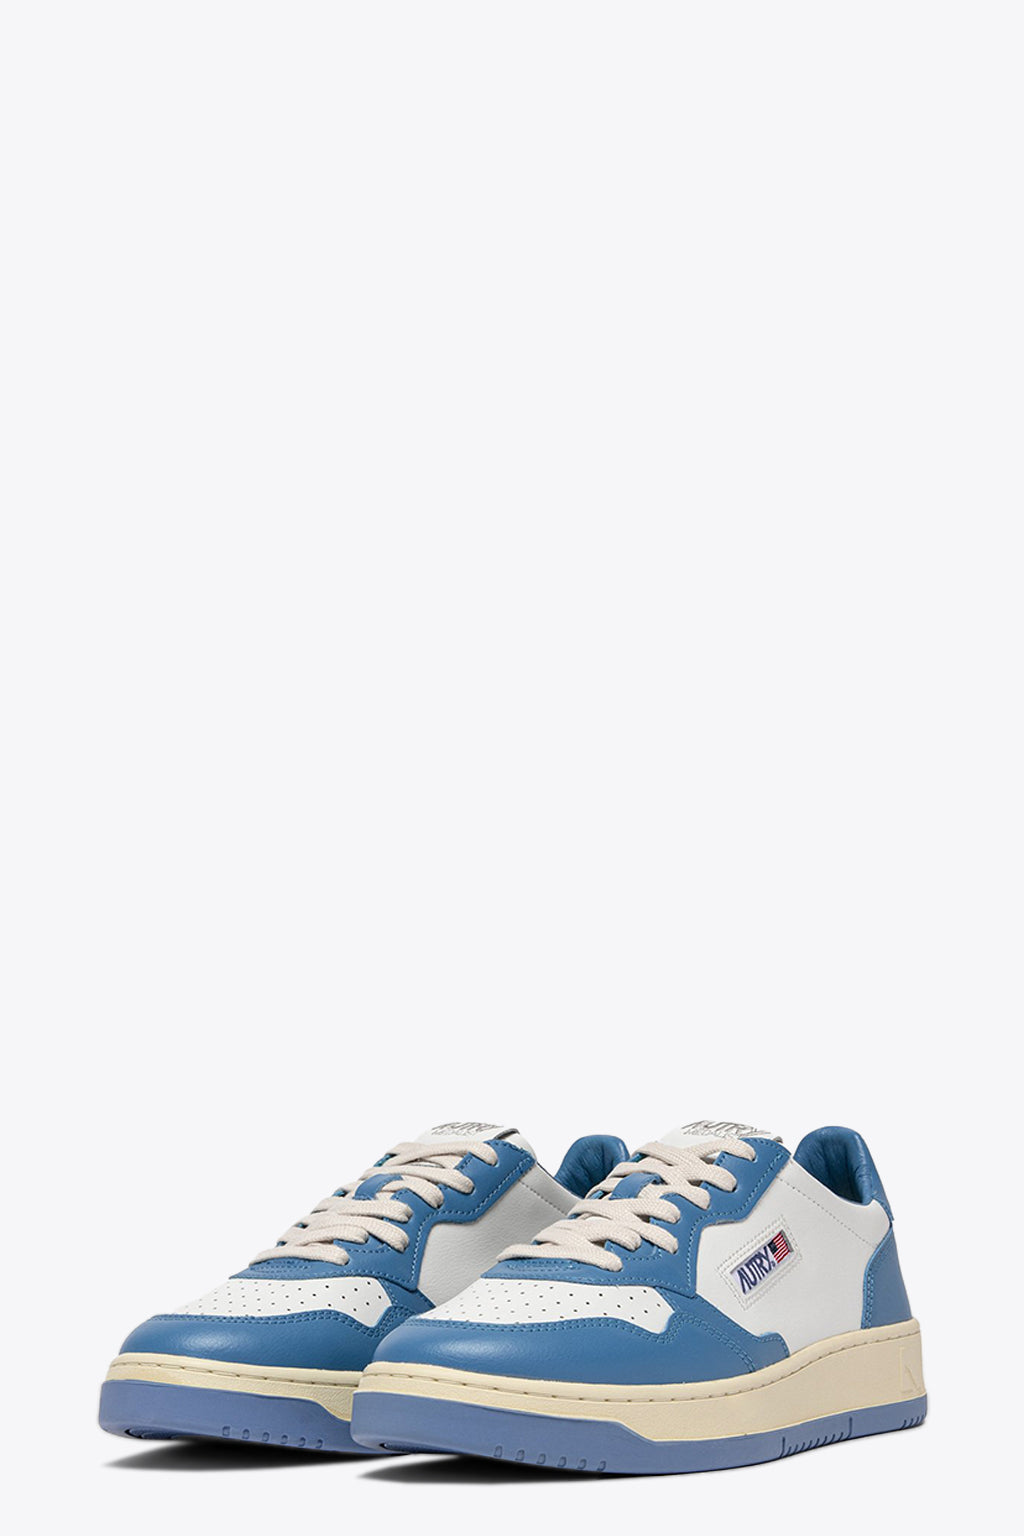 alt-image__Sky-blue-and-white-leather-low-sneaker---Medalist